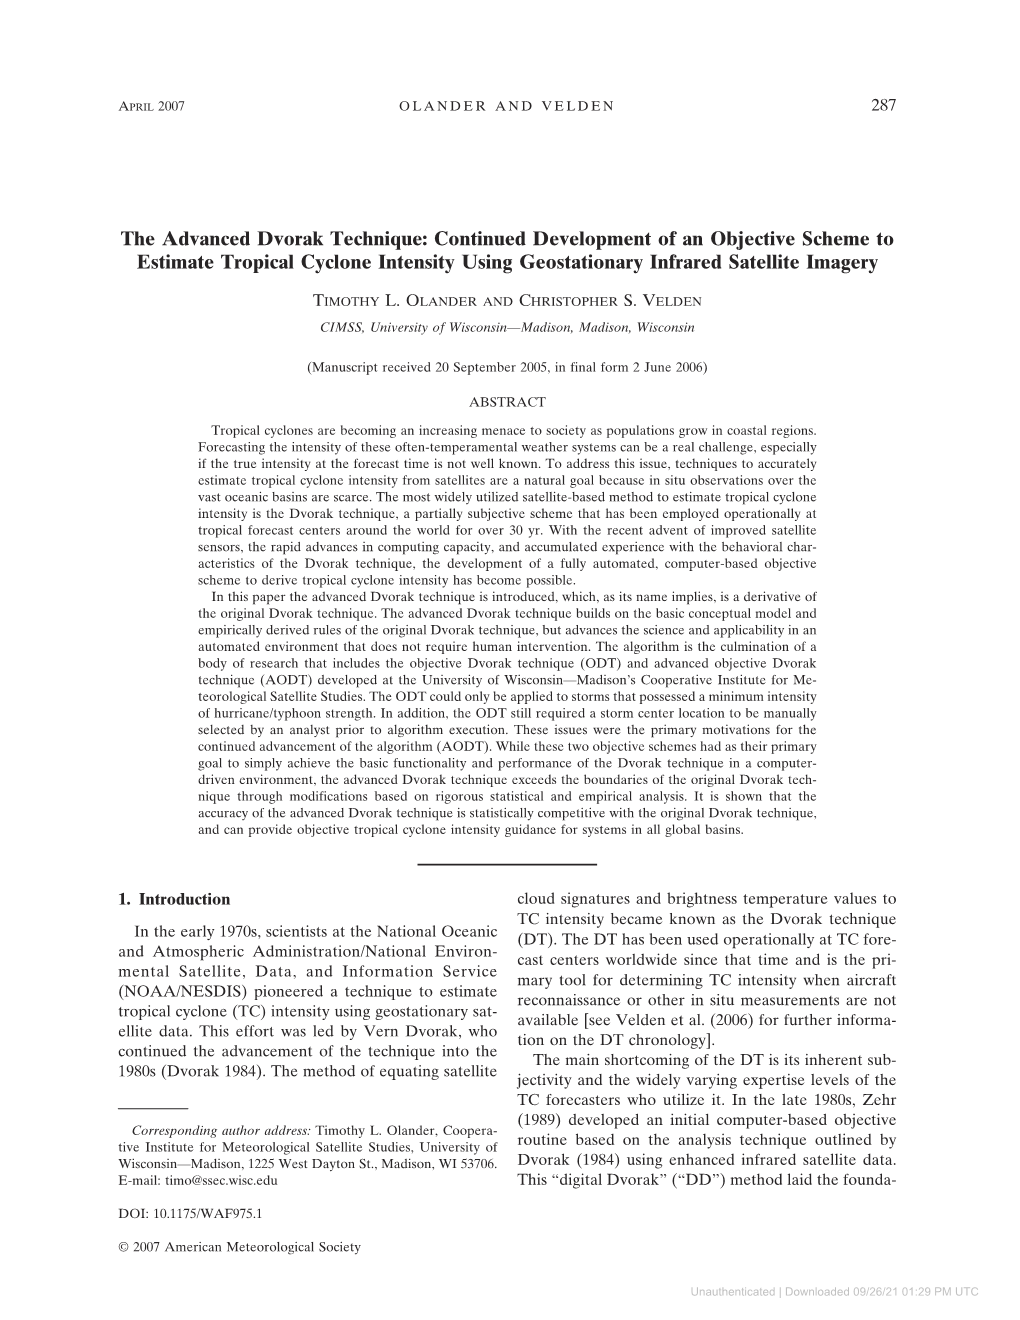 The Advanced Dvorak Technique: Continued Development of an Objective Scheme to Estimate Tropical Cyclone Intensity Using Geostationary Infrared Satellite Imagery